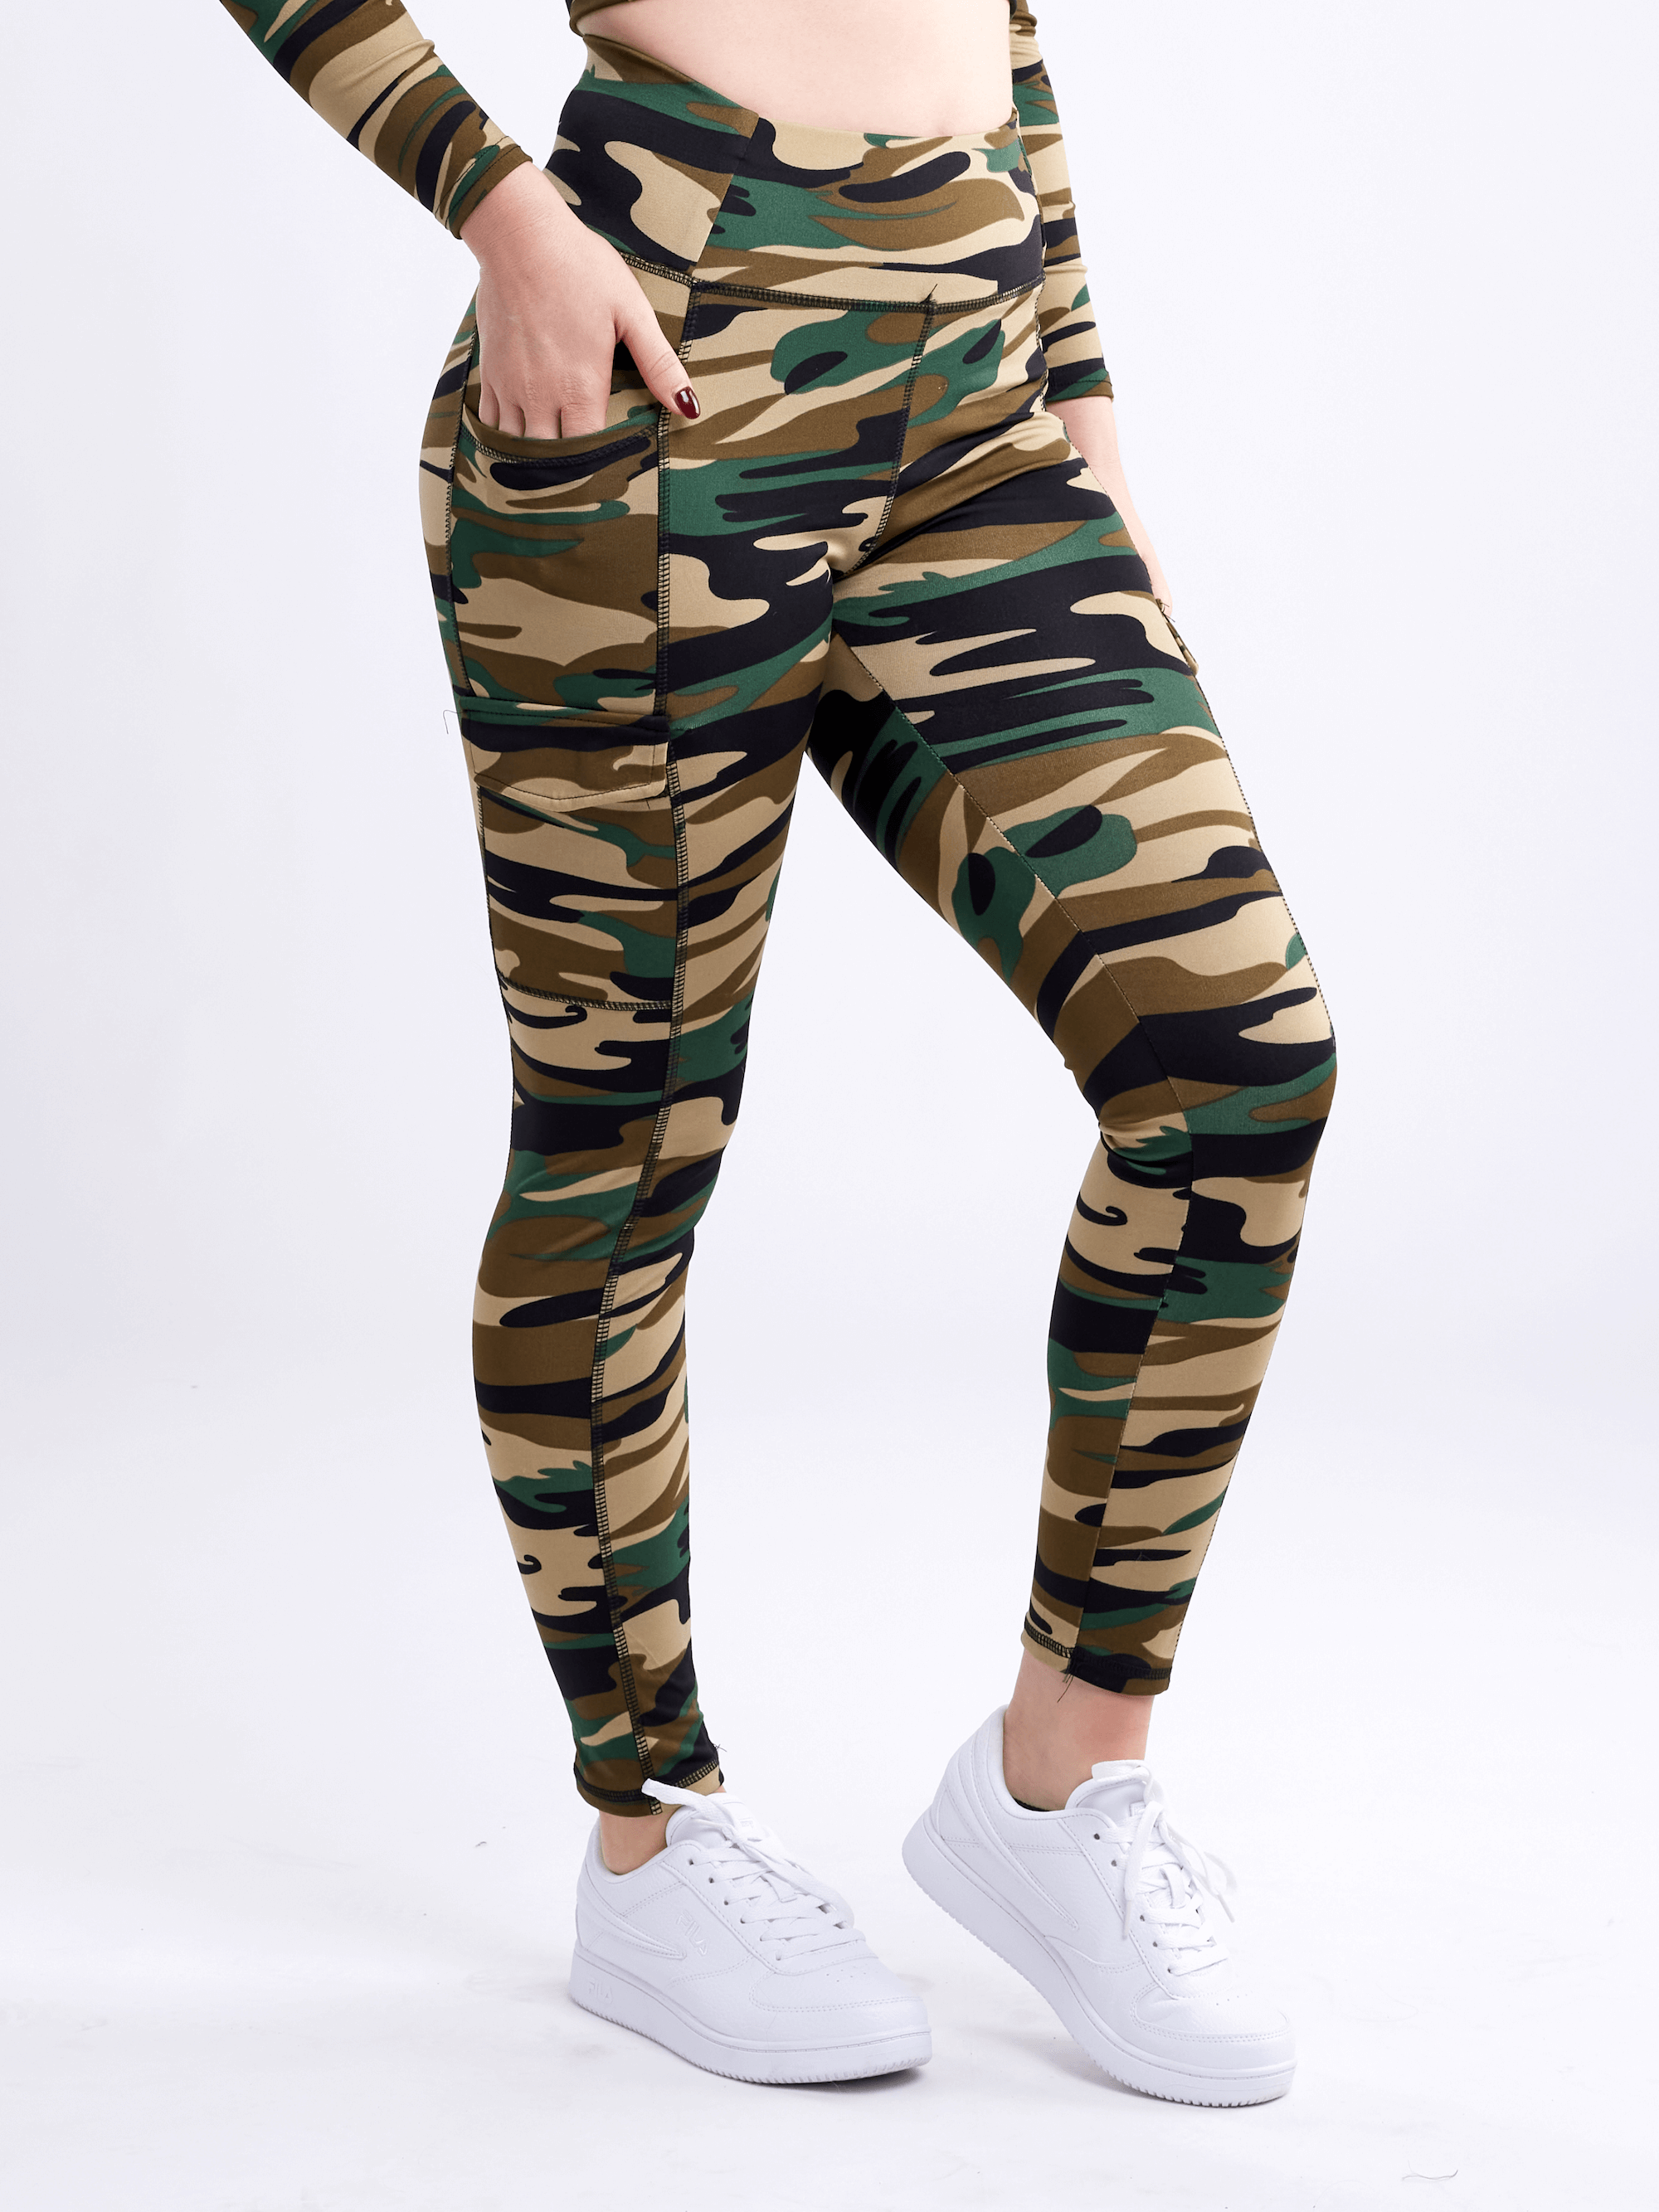 Jupiter Gear High-Waisted Tactical Outdoor Leggings with Side